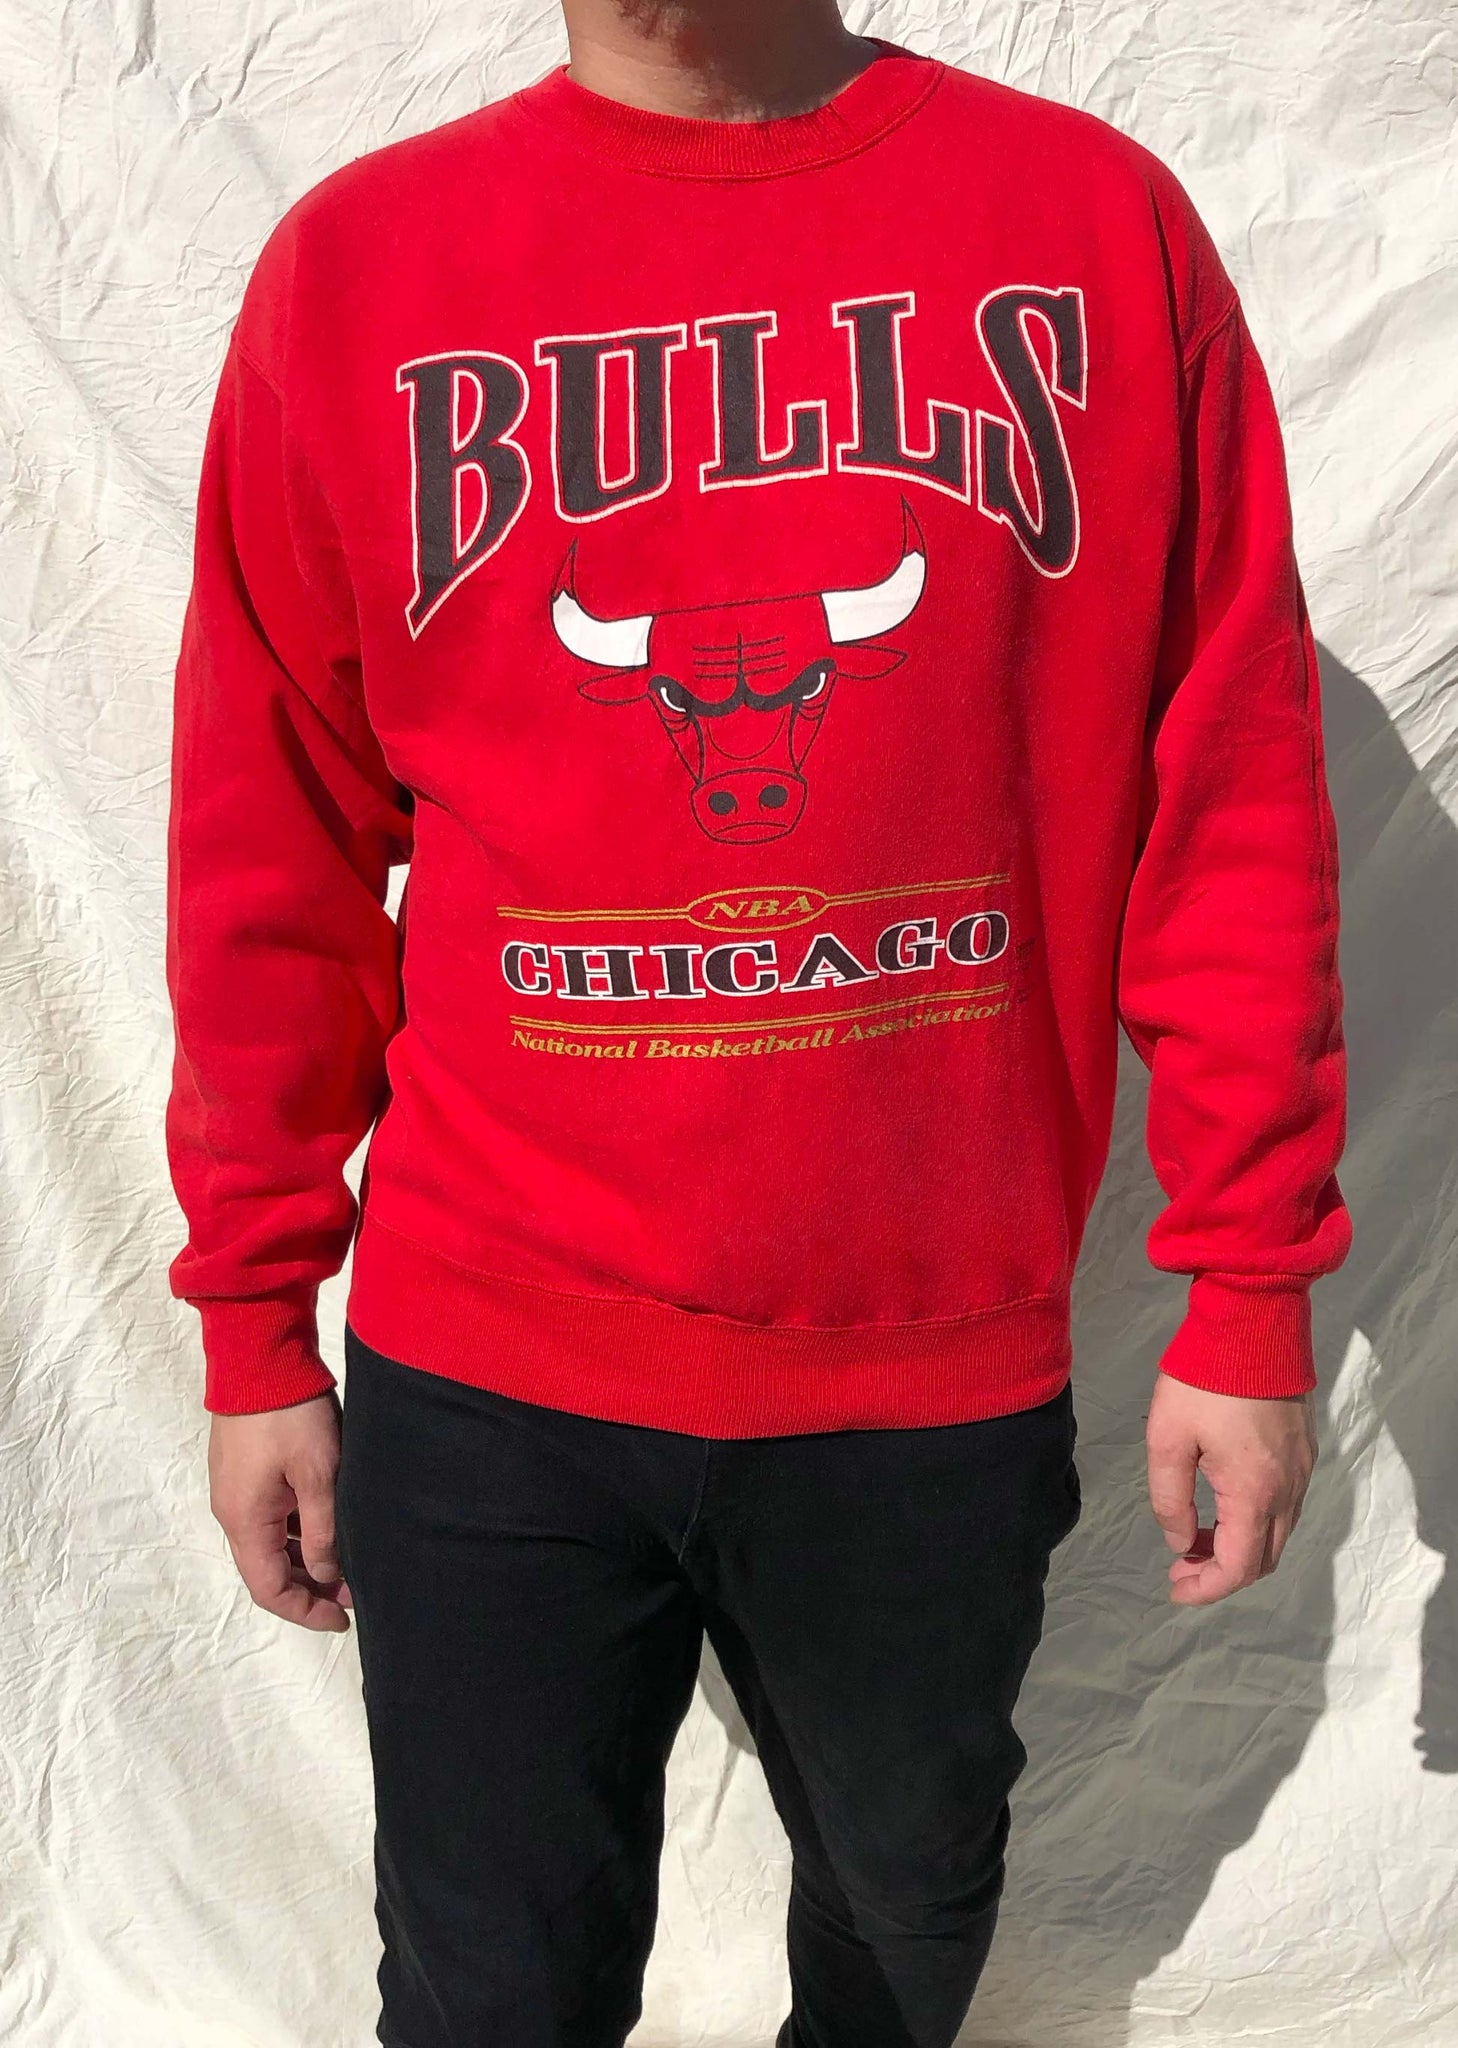 Vintage 90's Chicago Bulls NBA Basketball Red T Shirt Size 